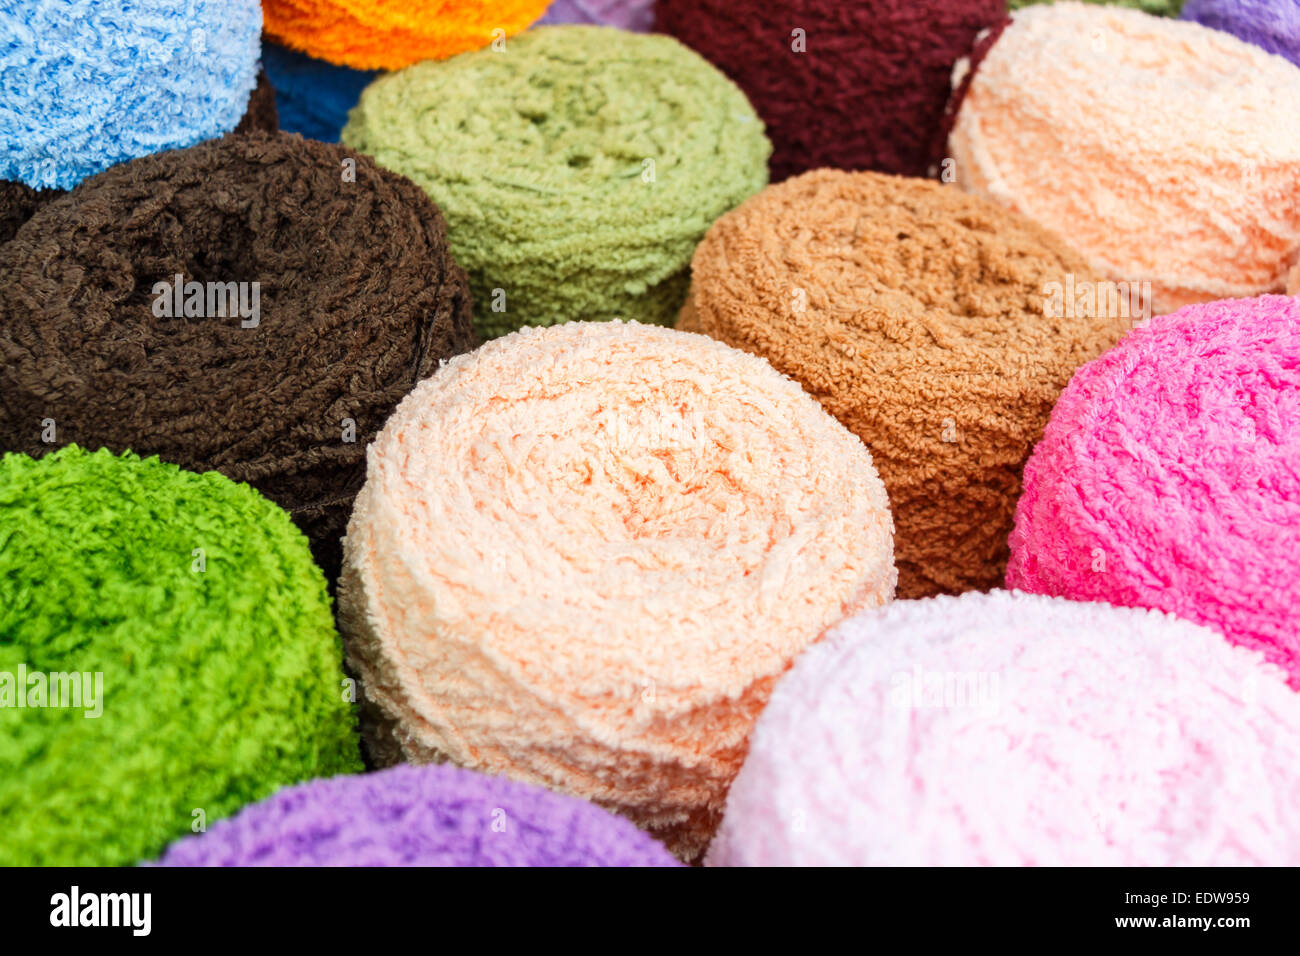 close up to group of colorful knitting wool Stock Photo